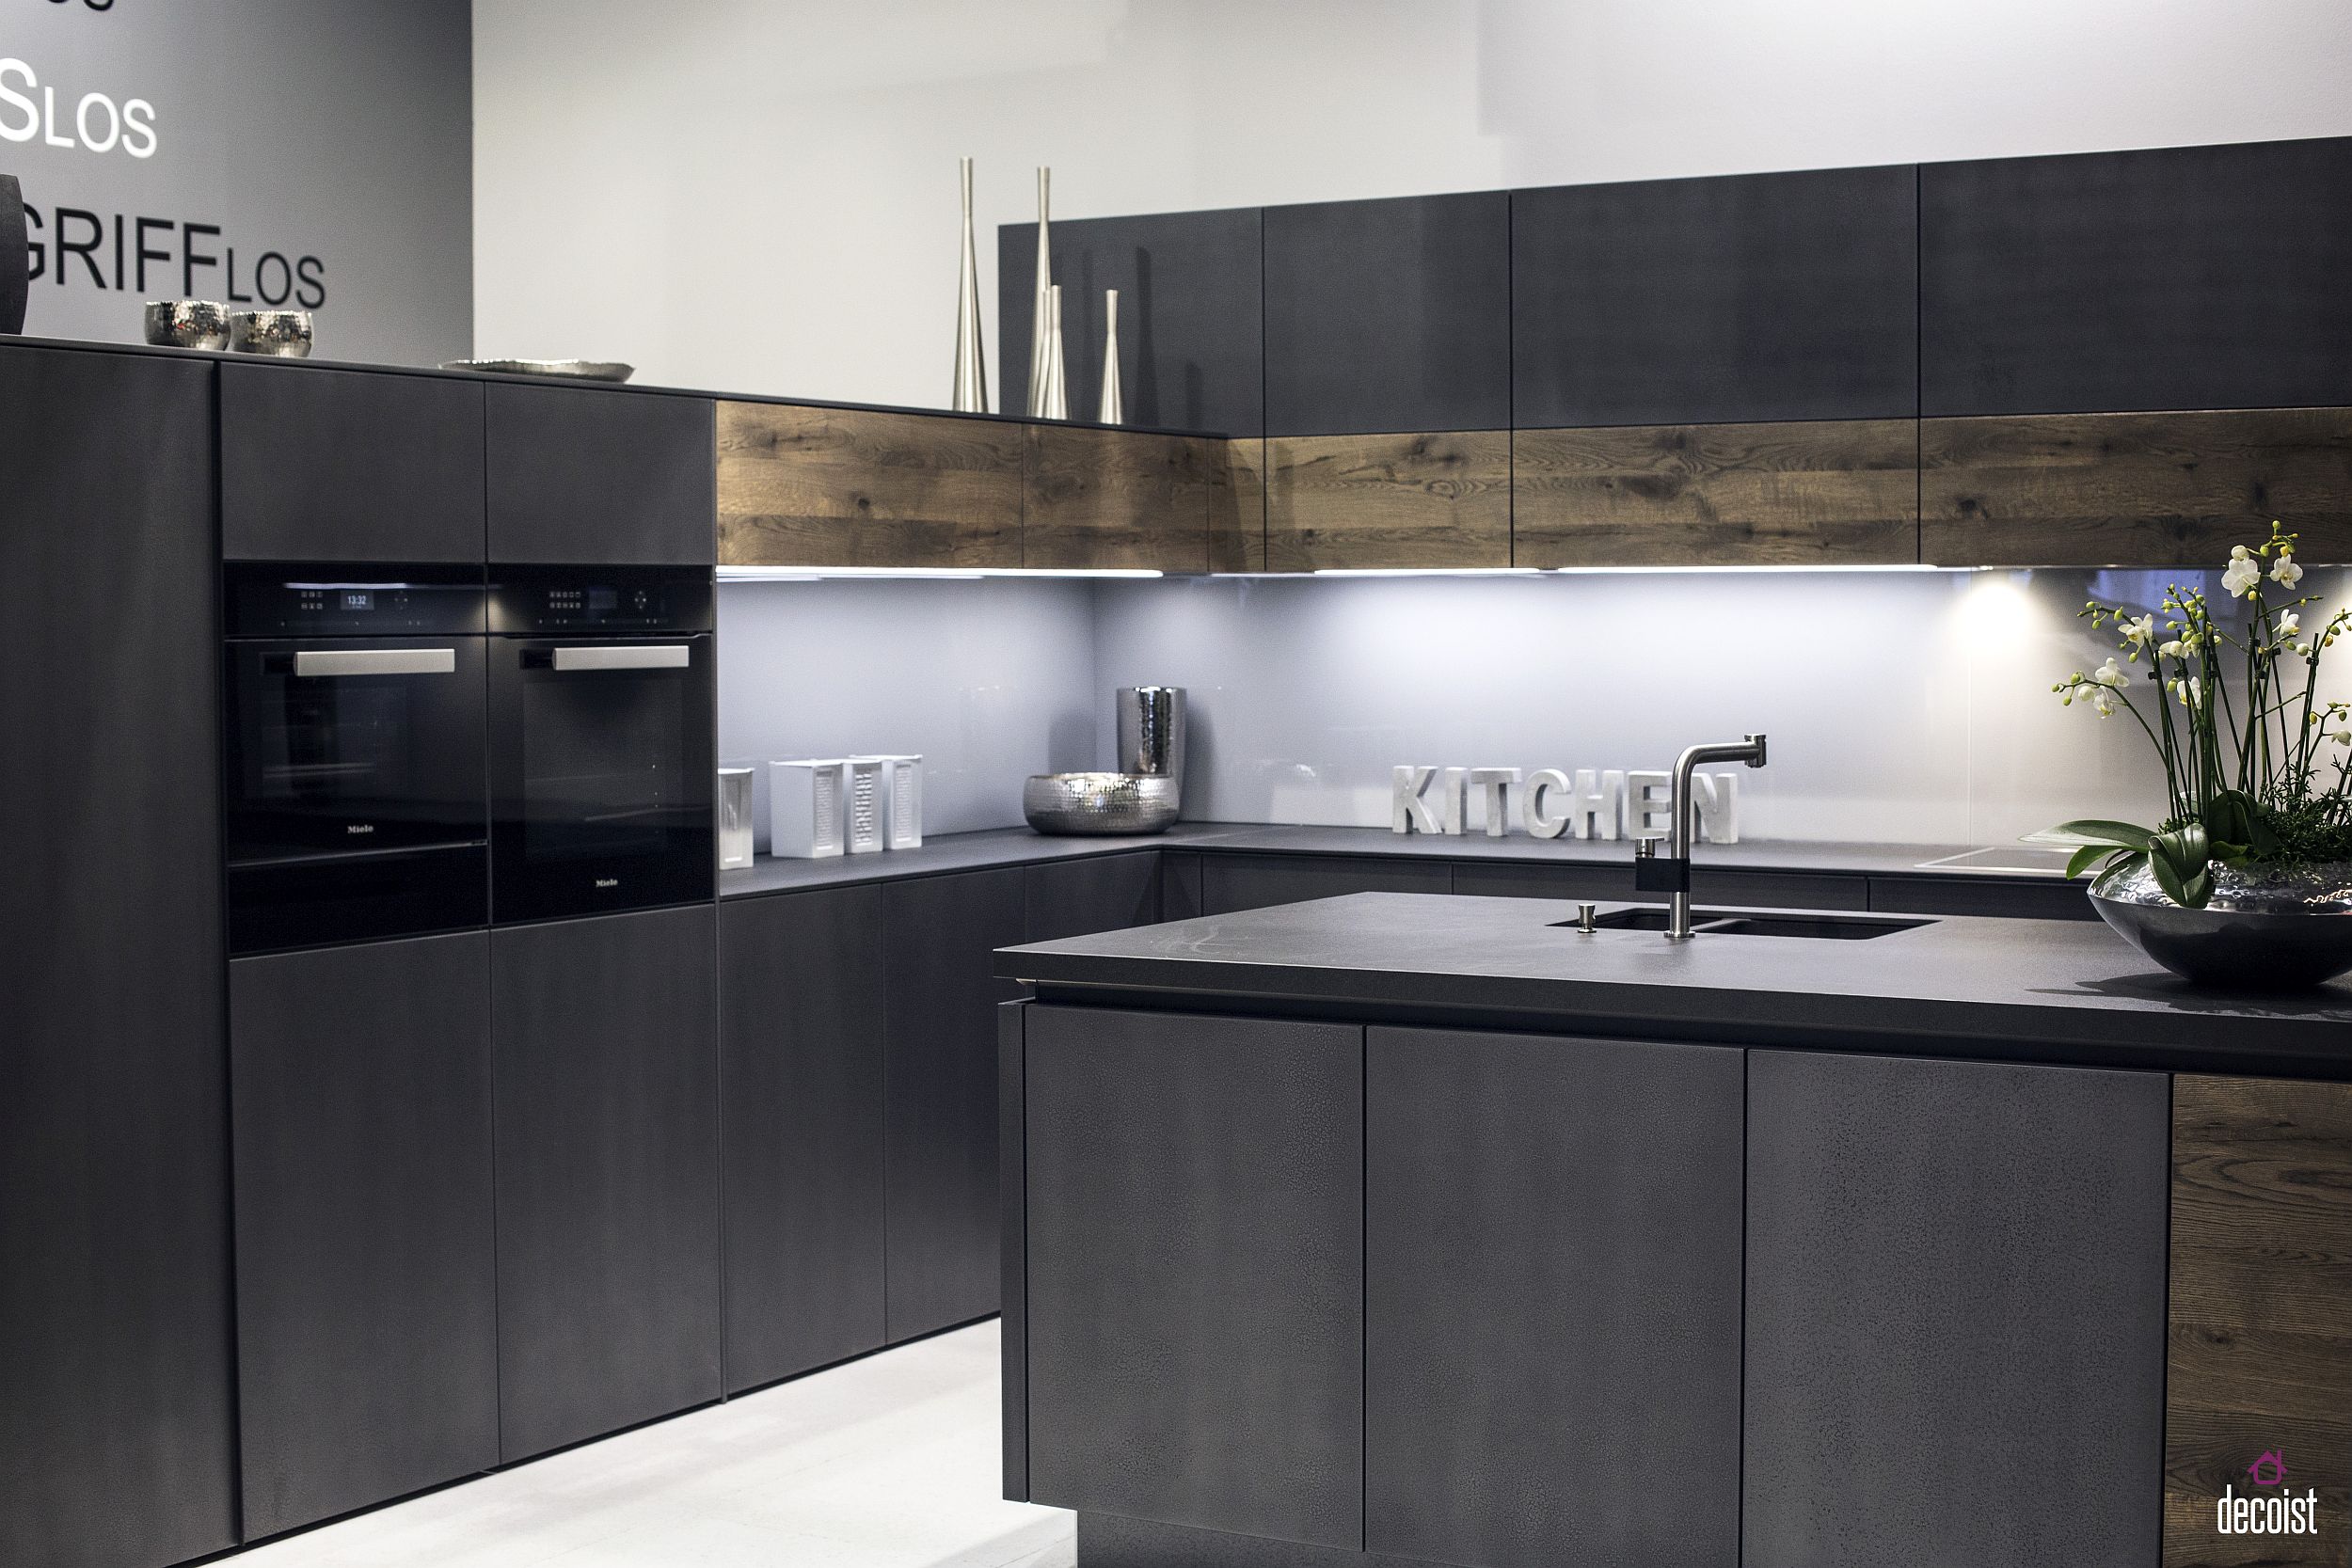 Create a balance between open and closed dynamics in the elegant kitchen